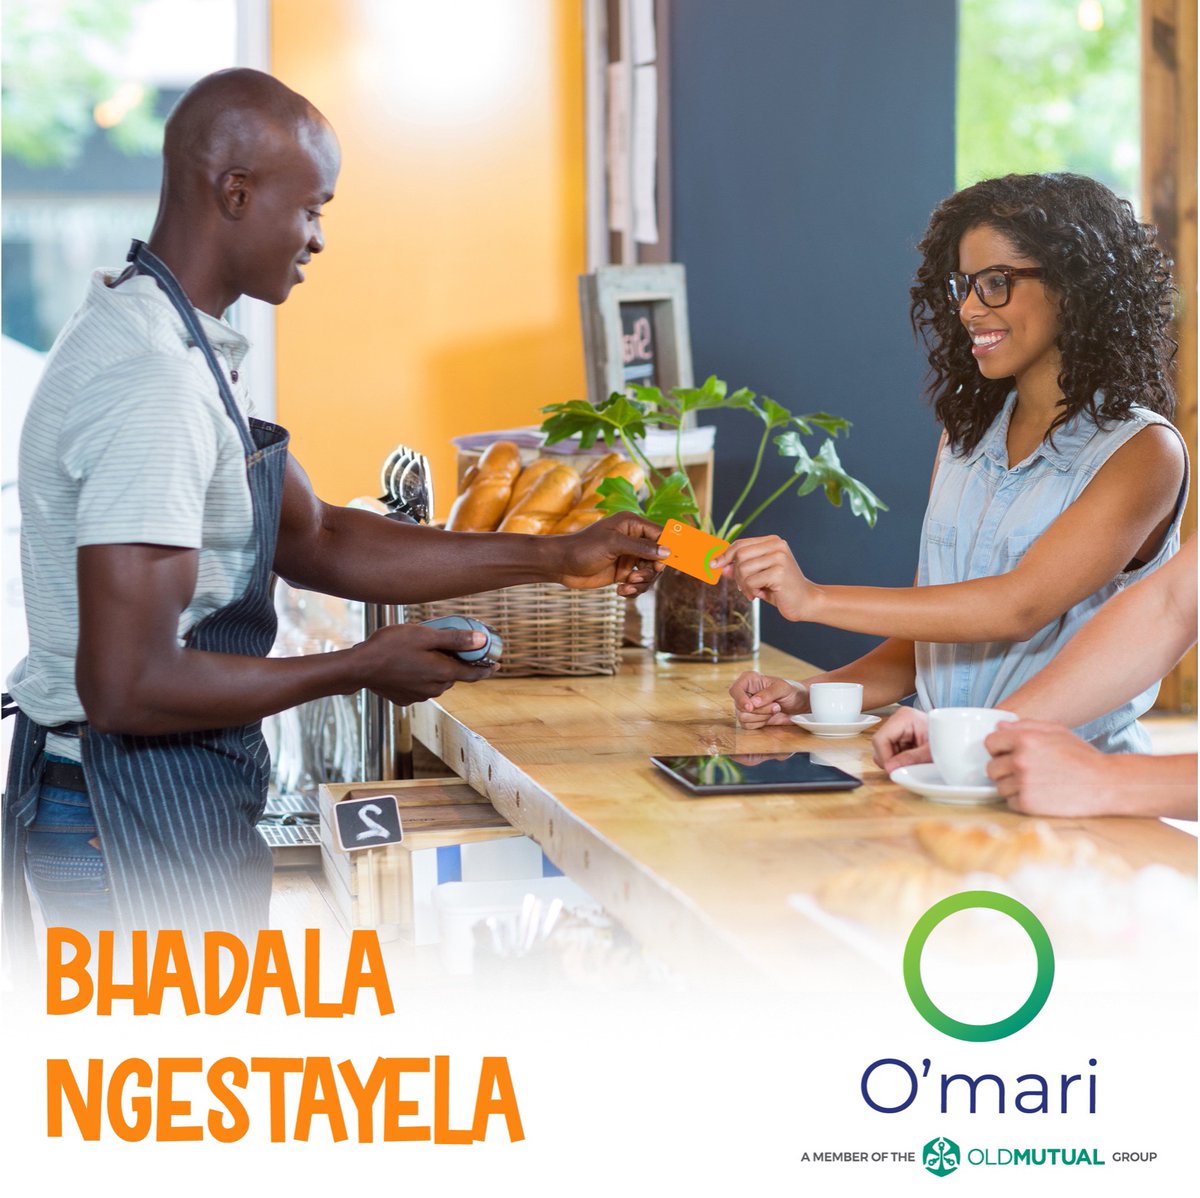 Bhadala ngestayela!
Pay for your groceries, meals and other goods and services with your O’maricard 💳
Get yours today!
#Moneytransfers
#Zipit
#Omari